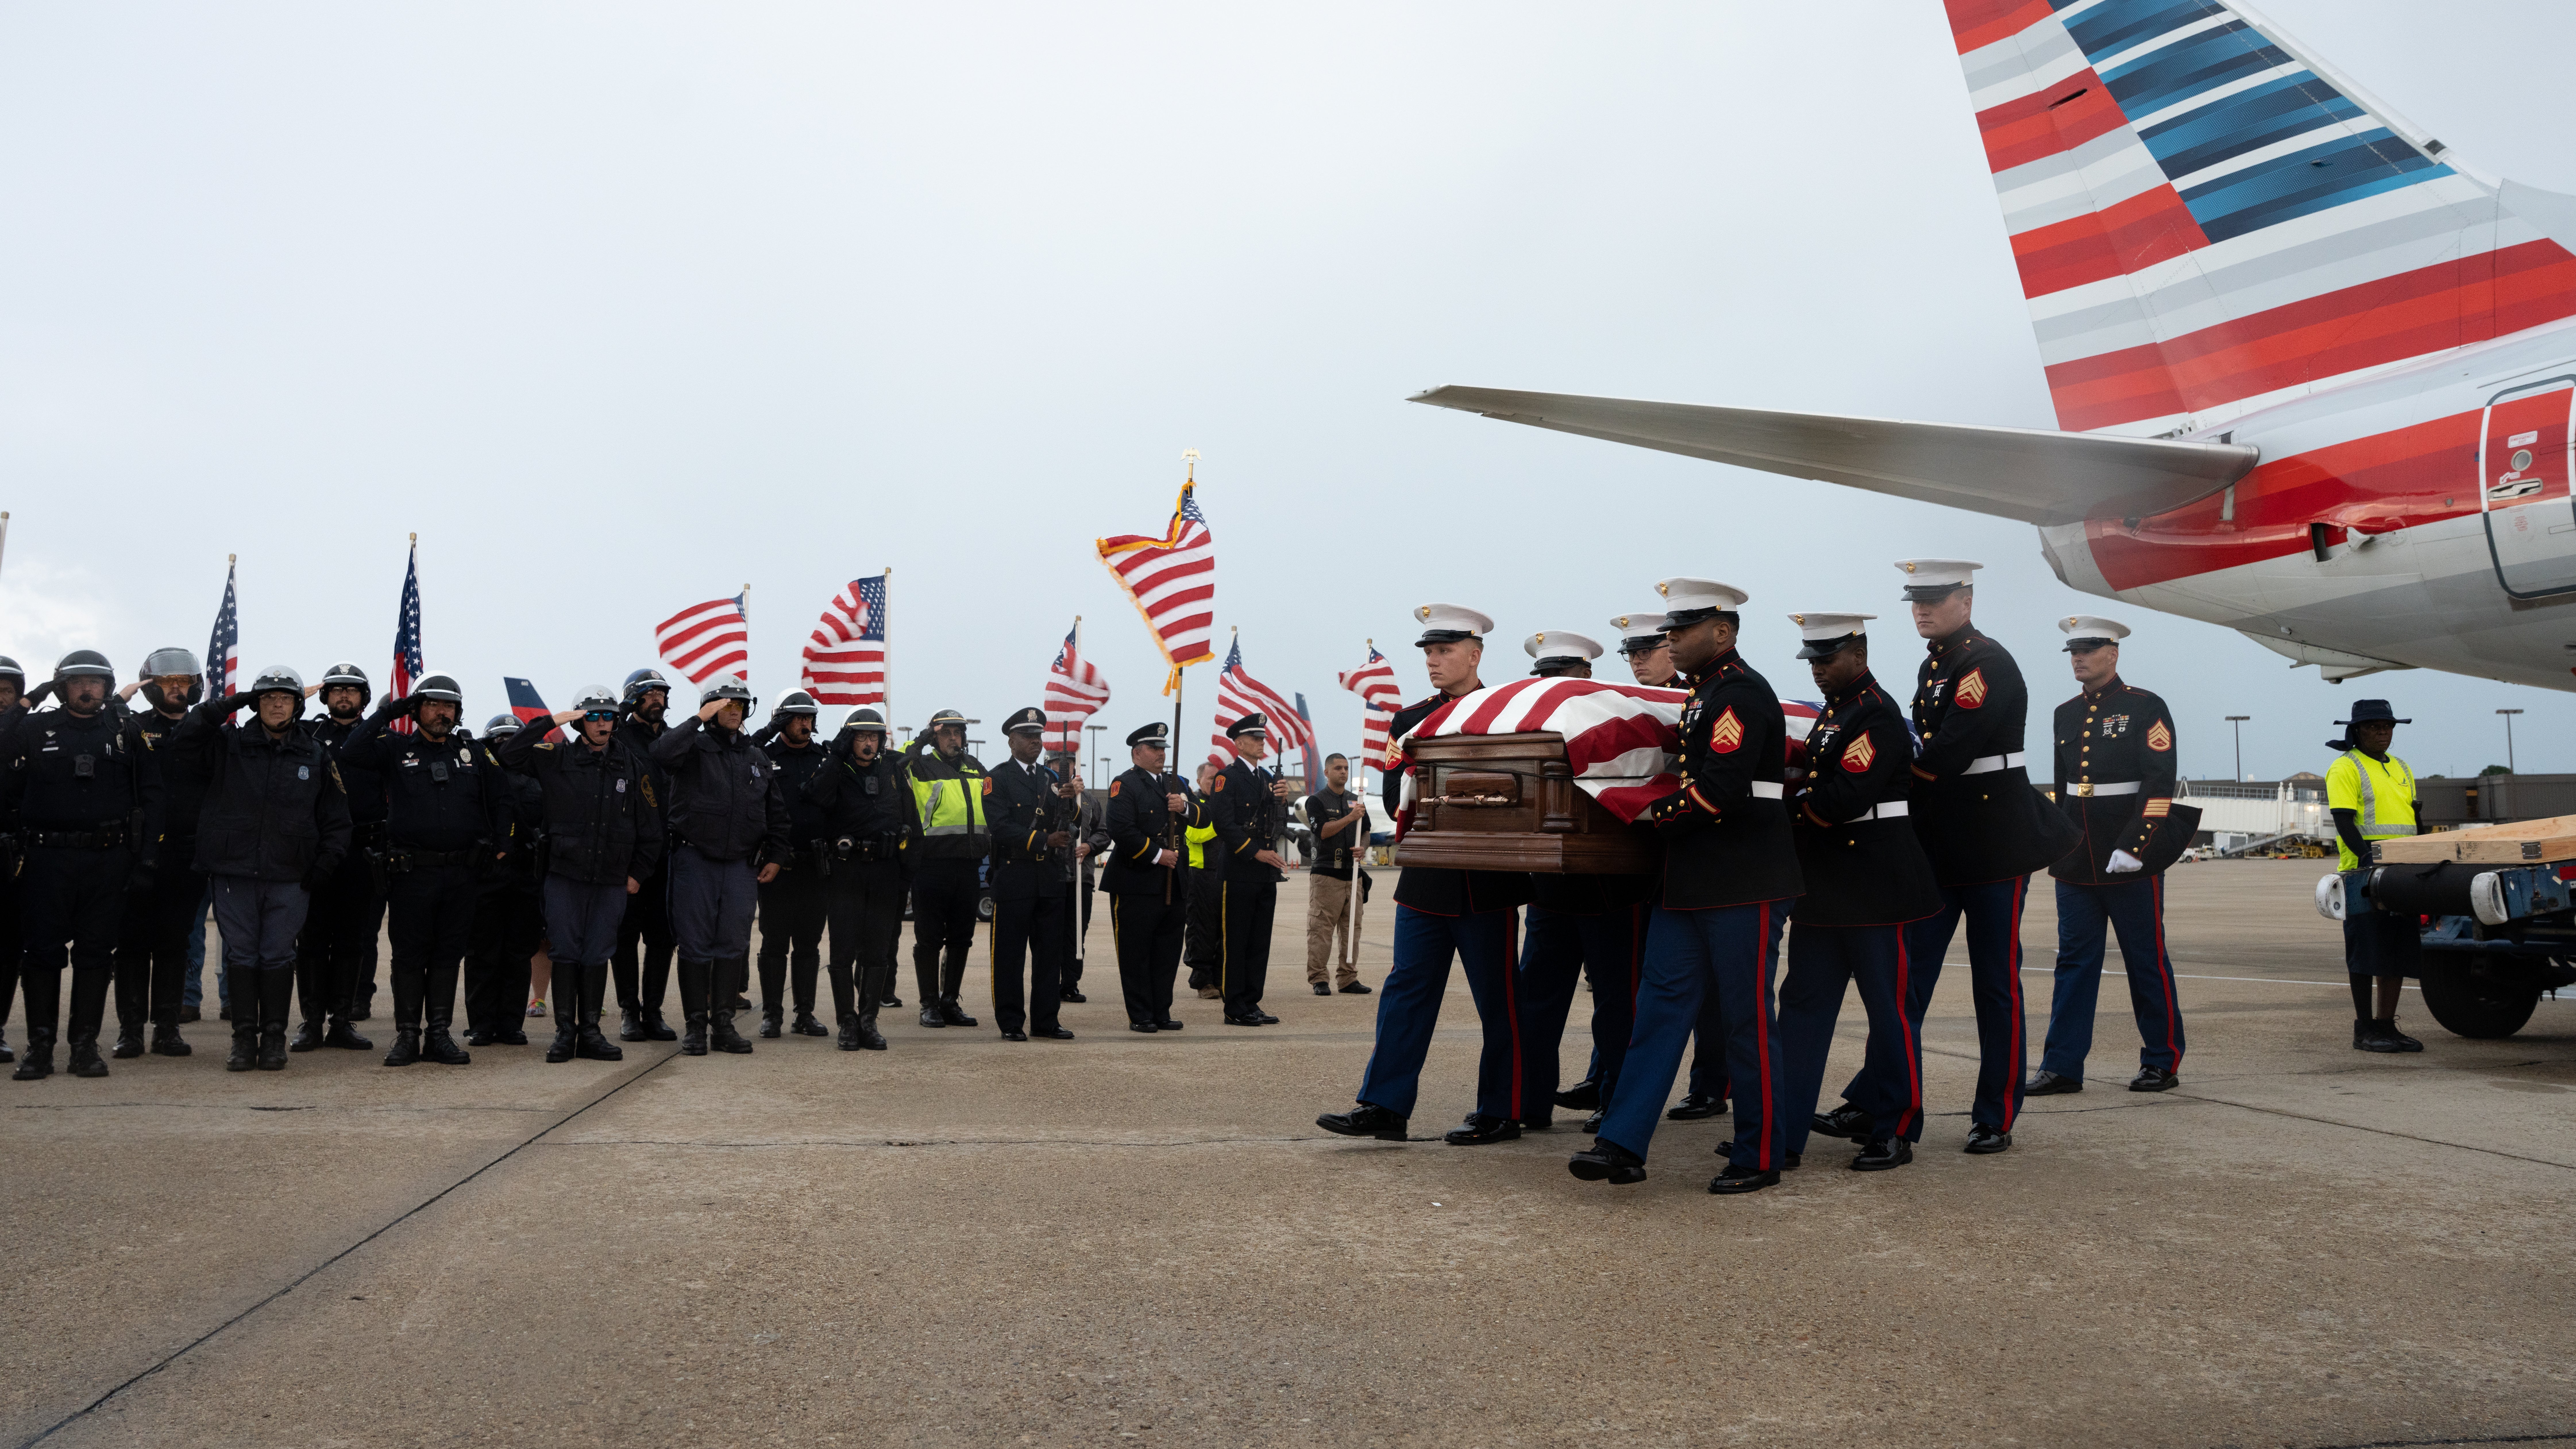 U.S. Marines from 4th Assault Amphibian Battalion, 4th Marine Division transfer the dignified remains of U.S. Marine Corps Cpl. Jack Brown at Norfolk International Airport, Va., Aug 10, 2022. The U.S. Marine was identified and recovered during the Defense POW/MIA Accounting Agency (DPAA) investigative efforts to locate and identify remains of fallen heroes. Brown was posthumously awarded the Bronze Star and Purple Heart for his acts of valor and giving the ultimate sacrifice during the Battle of Saipan in World War II. (U.S. Marine Corps photo by Cpl. Hannah Adams)